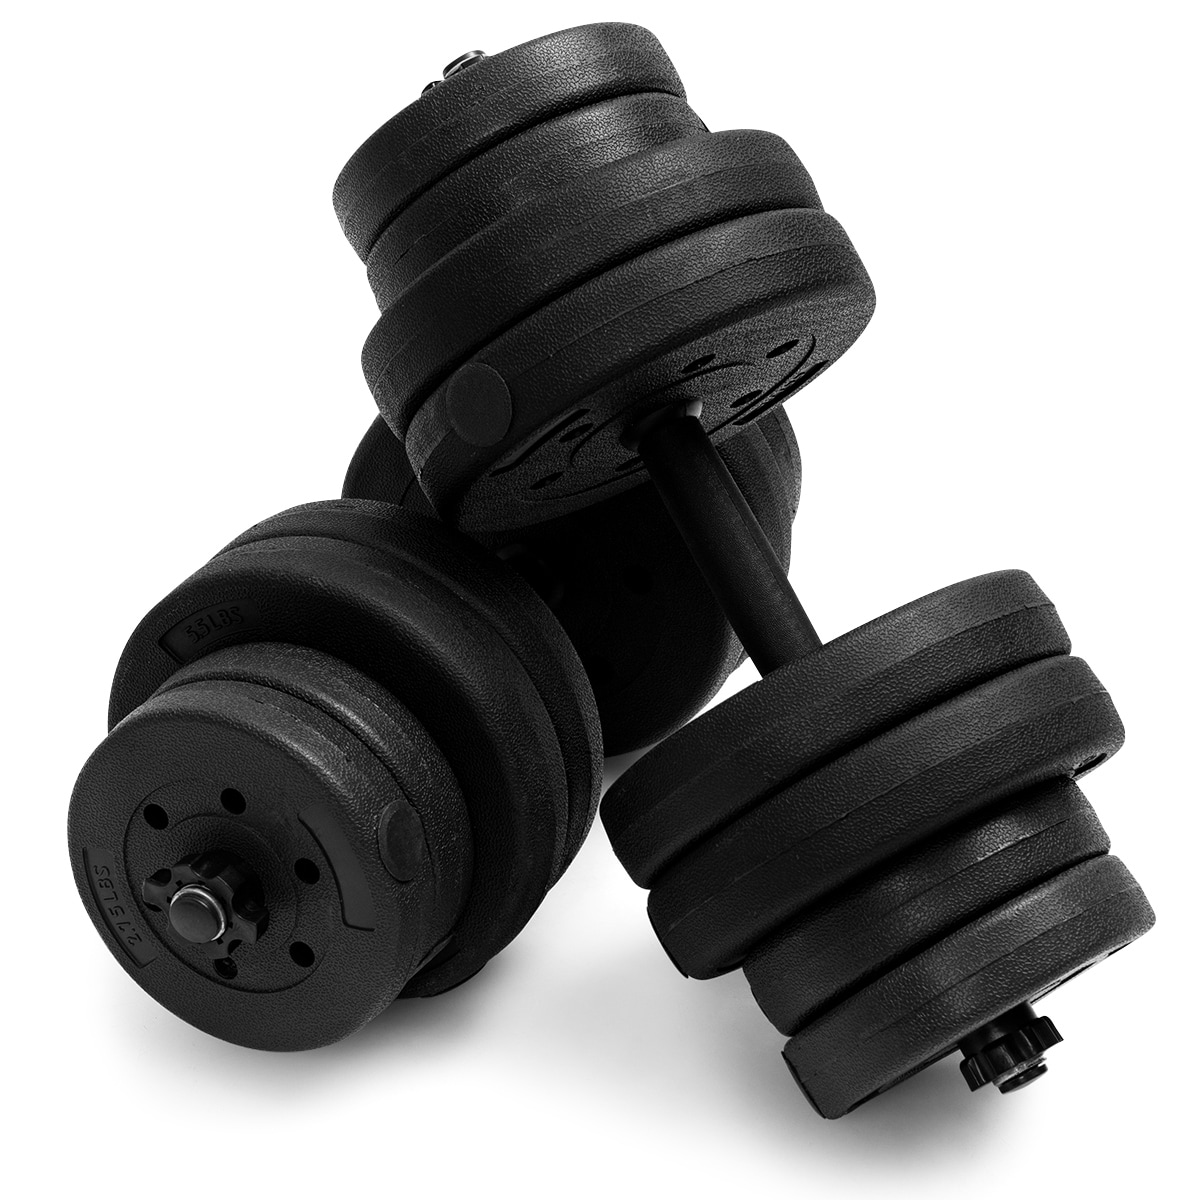 https://ak1.ostkcdn.com/images/products/is/images/direct/5583dc61b80a80eddb8c6850794af16767d08f4f/Costway-66-LB-Dumbbell-Weight-Set-Fitness-16-Adjustable-Plates-Workout.jpg